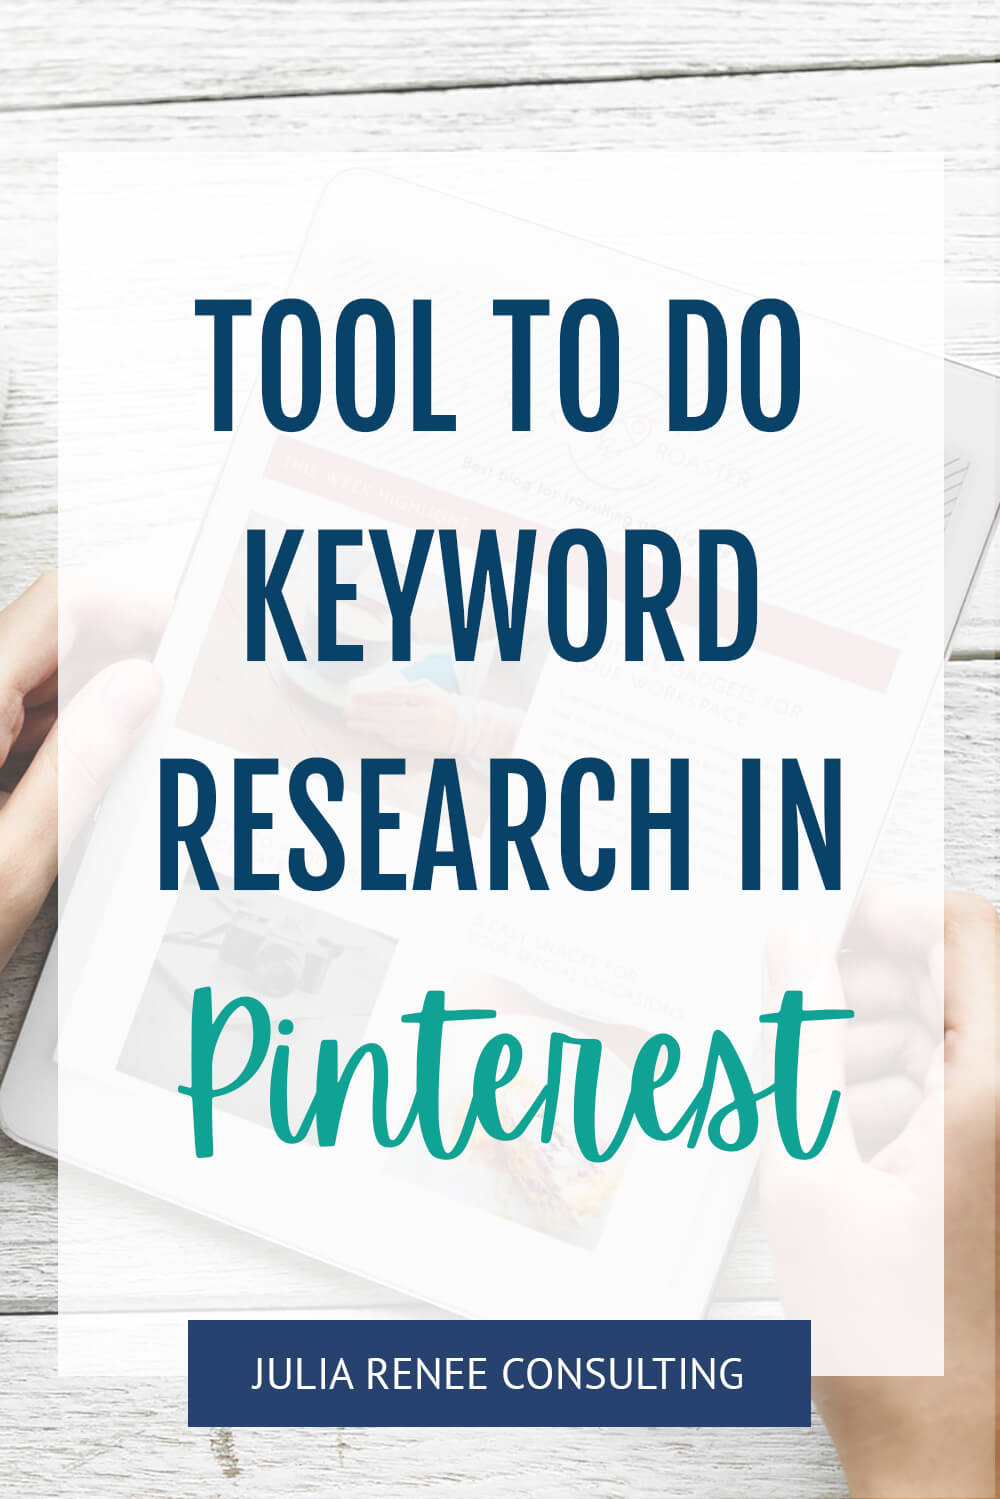 Pinterest Trends: How to Use the Pinterest Keyword Tool